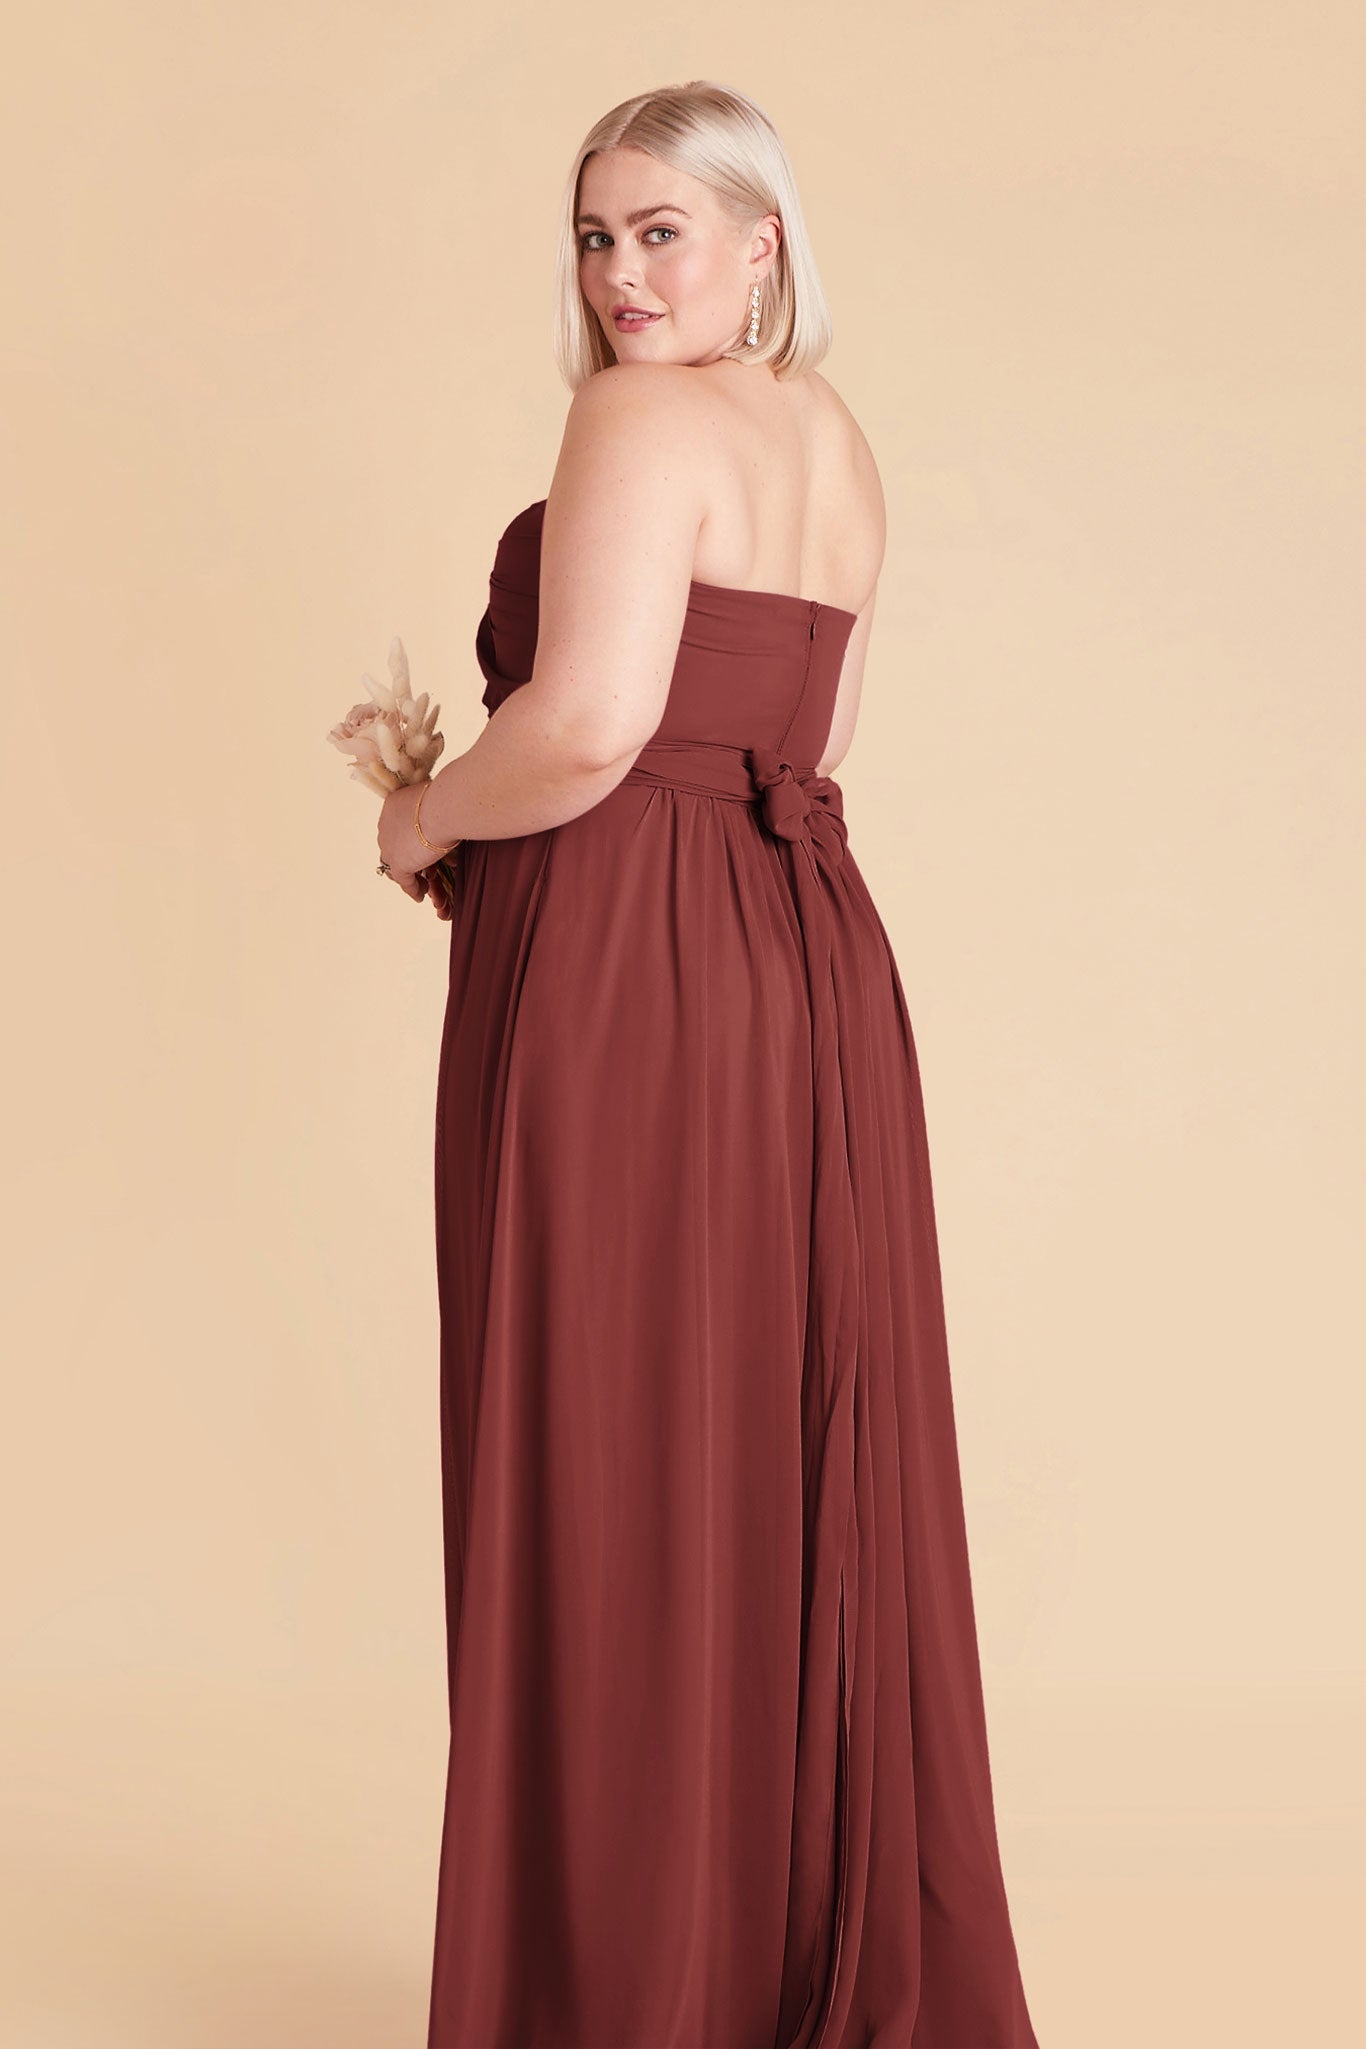 Rosewood Grace Convertible Dress by Birdy Grey